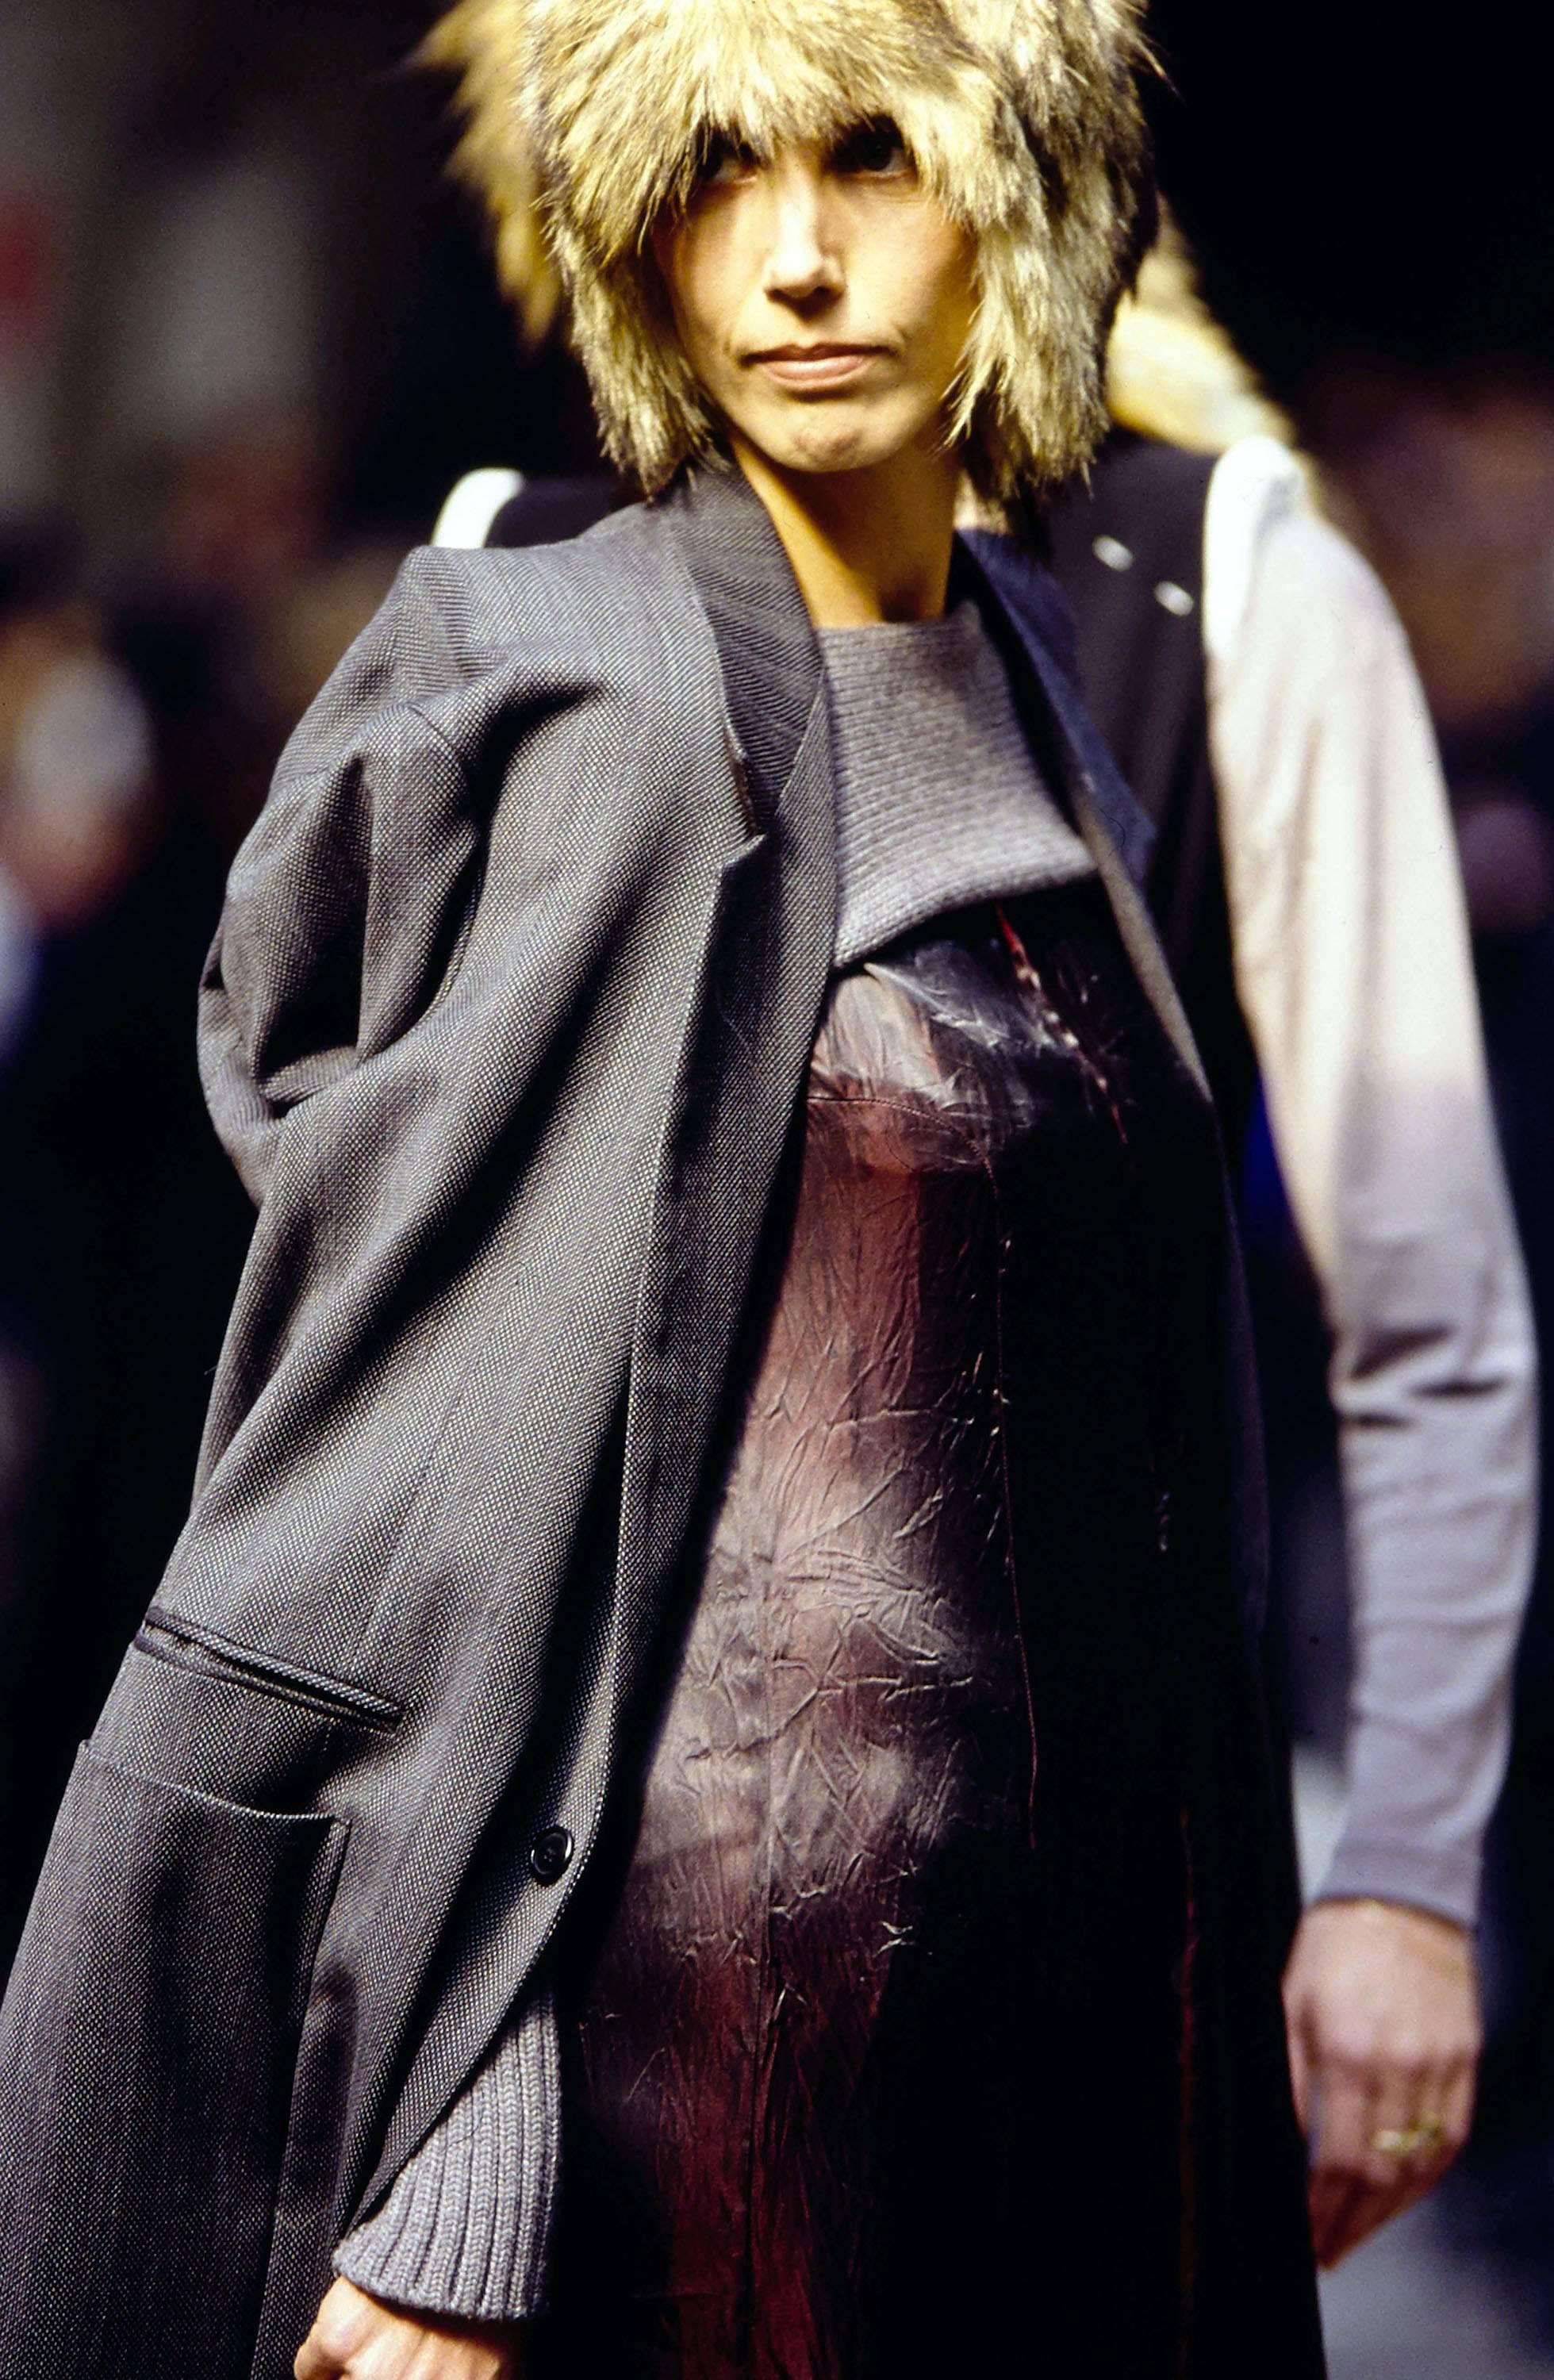 Maison Martin Margiela Autumn-Winter 1997 oversized blazer jacket worn with inverted sleeves. 

- XXL cut
- internal pointed shoulder pads
- two button closure
- one diagonal welt pocket on right chest
- two jetted pockets 
- two flat square